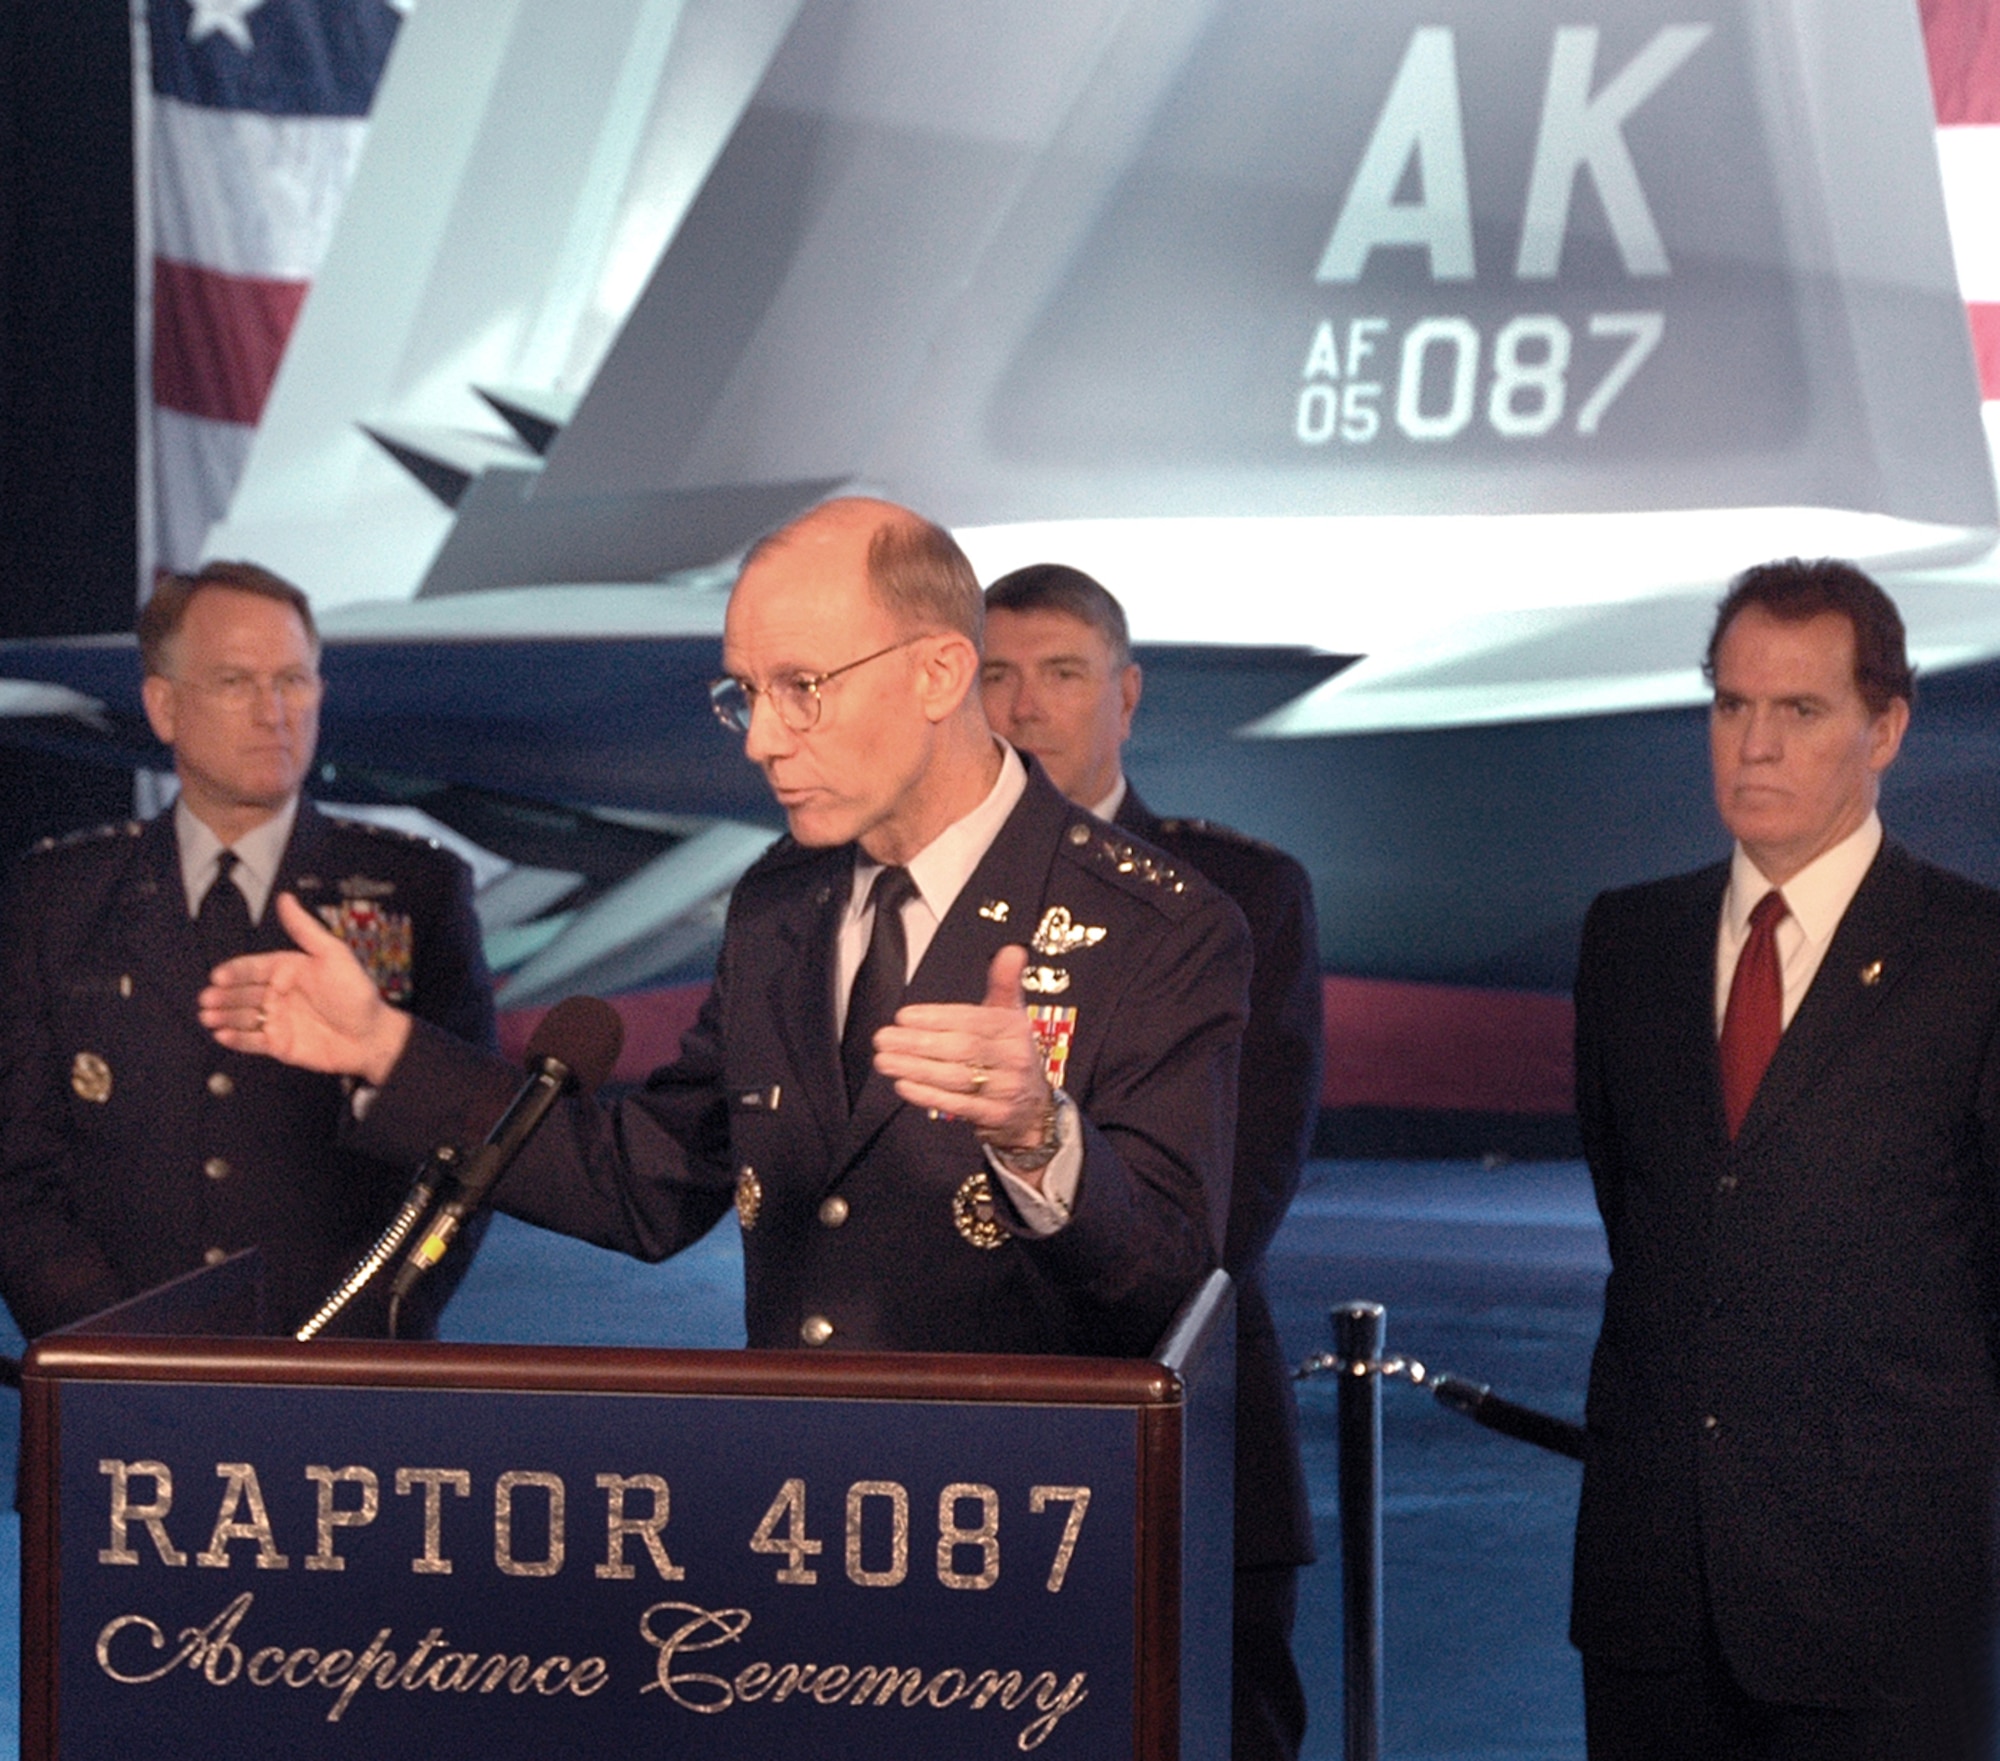 Gen. John D.W. Corley, the vice chief of staff from Headquarters U.S. Air Force, speaks during the acceptance ceremony for Pacific Air Force's first F-22 Raptor Feb. 12 at Marietta, Ga. This F-22 is the first of several that will be assigned to PACAF at Elmendorf Air Force Base, Alaska. The F-22 aerodesign, advanced flight controls, thrust vectoring, and high thrust-to-weight ratio provide the capability to outmaneuver all current and projected aircraft. (U.S. Air Force photo/John Rossino)